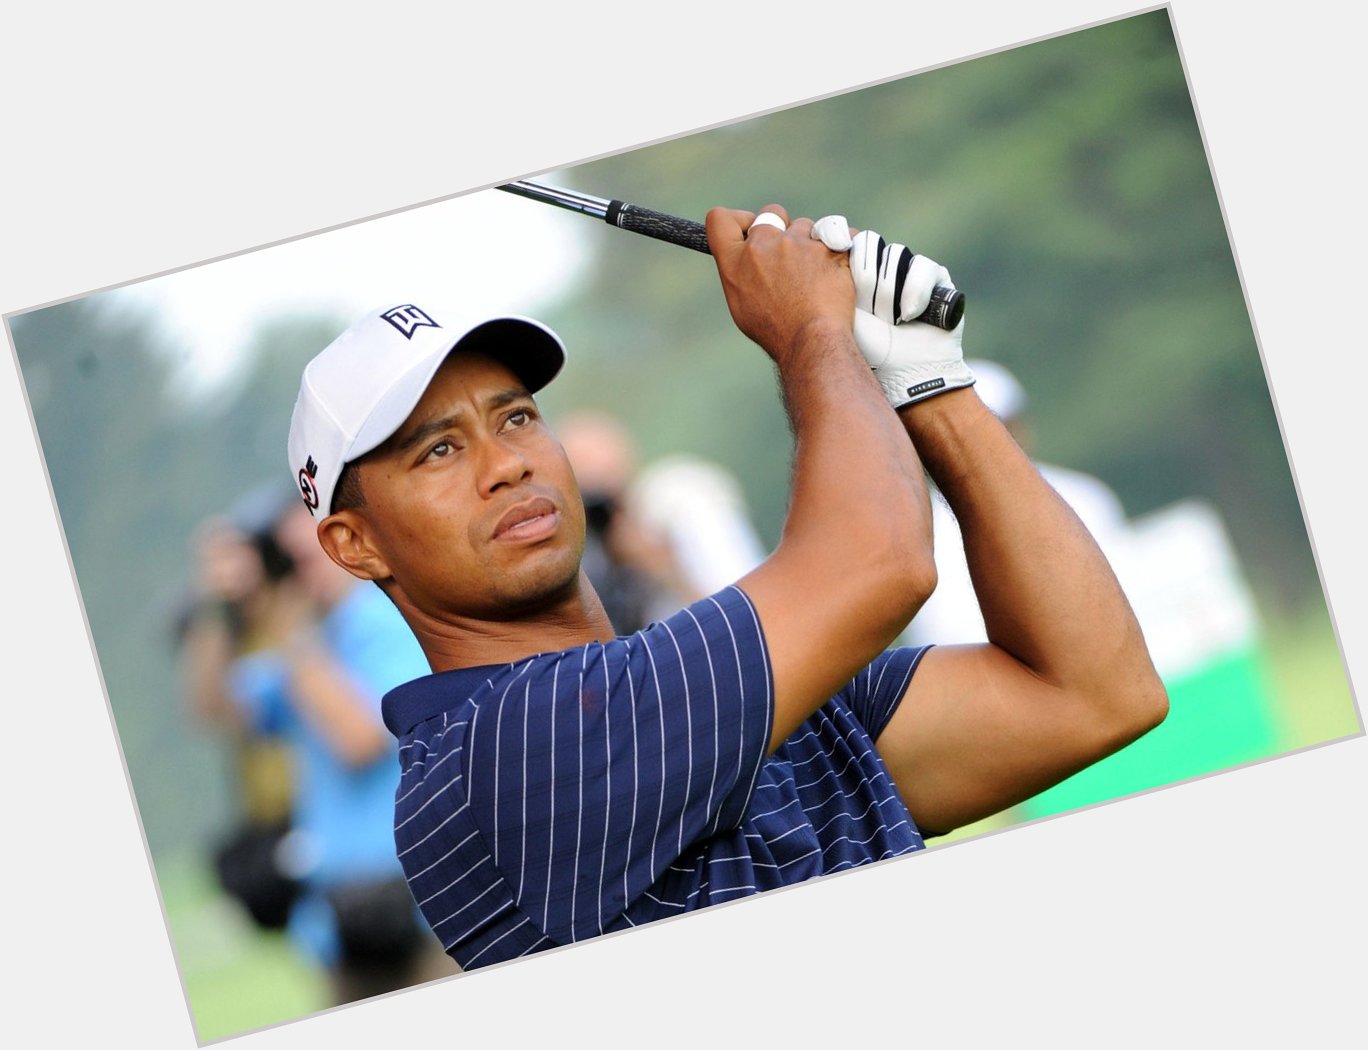 And happy birthday to Eldrick Tont Woods! Tiger Woods is 40 today! 